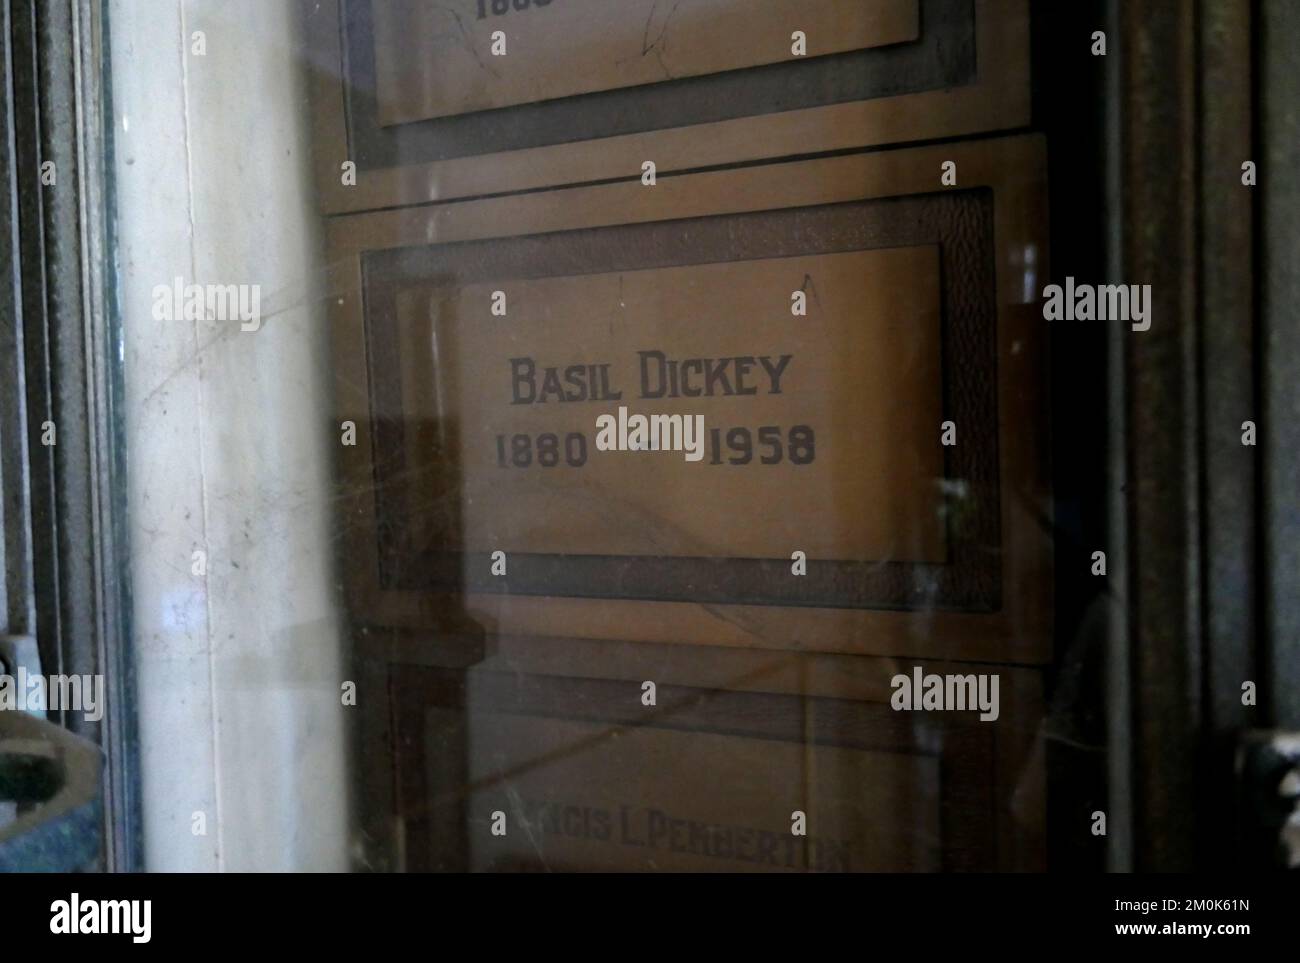 Los Angeles, California, USA 3rd December 2022 Screenwriter Basil Dickey's Grave/urn in Abby of the Psalms at Hollywood Forever Cemetery on December 3, 2022 in Los Angeles, California, USA. Photo by Barry King/Alamy Stock Photo Stock Photo